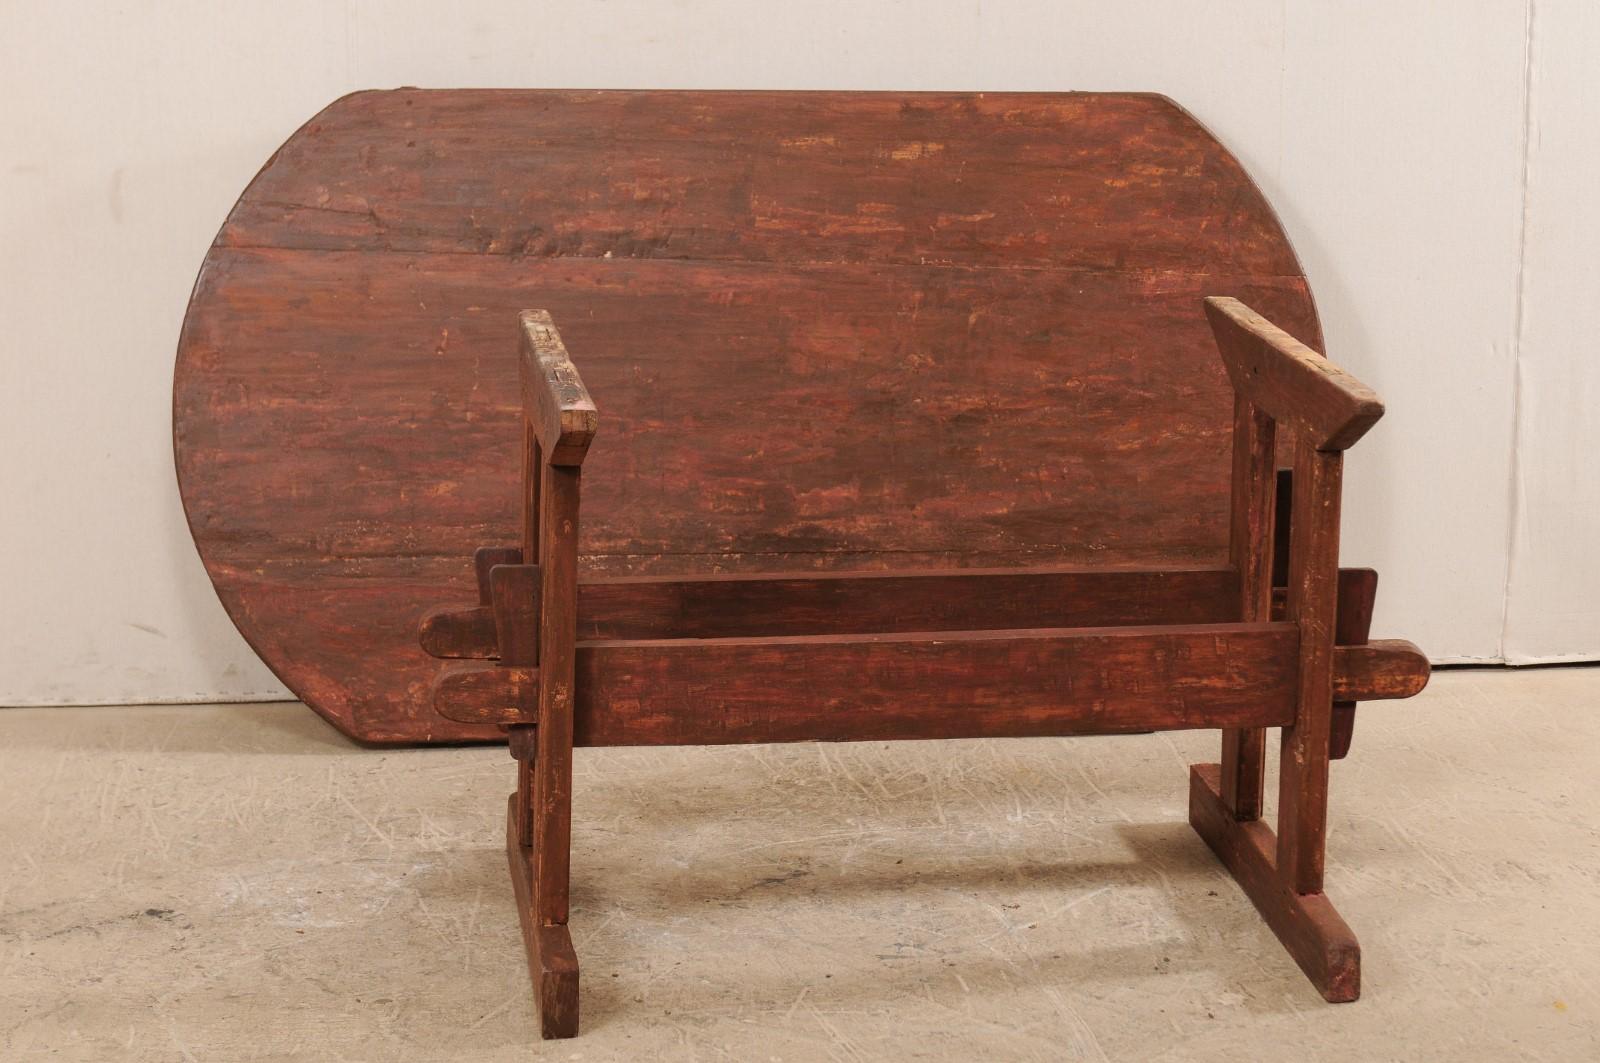 Early 19th Century Swedish Falun Red Wood Trestle Breakfast Table or Desk For Sale 4